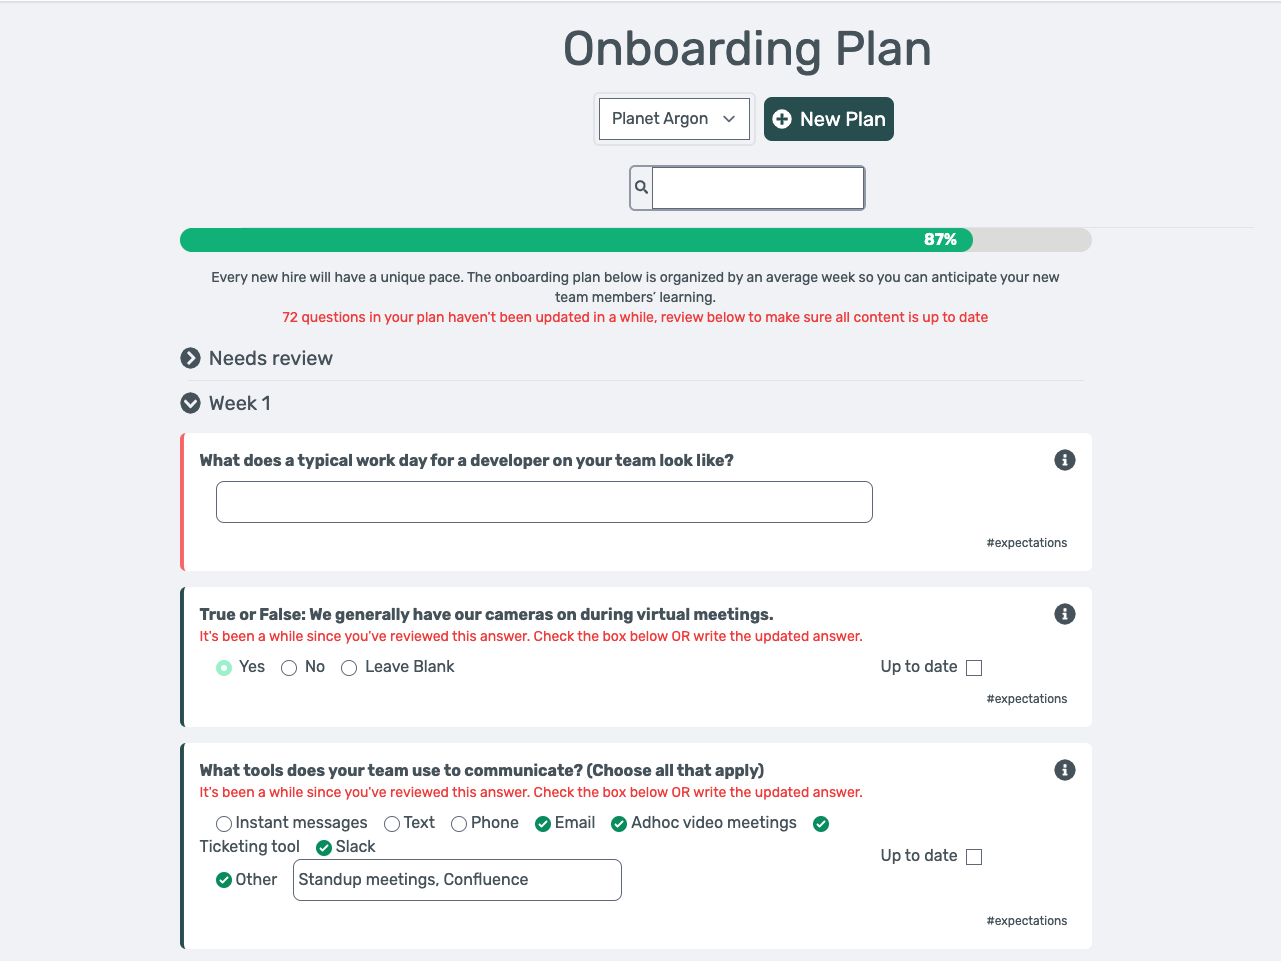 Regularly audit and update onboarding docs per edify’s suggestions